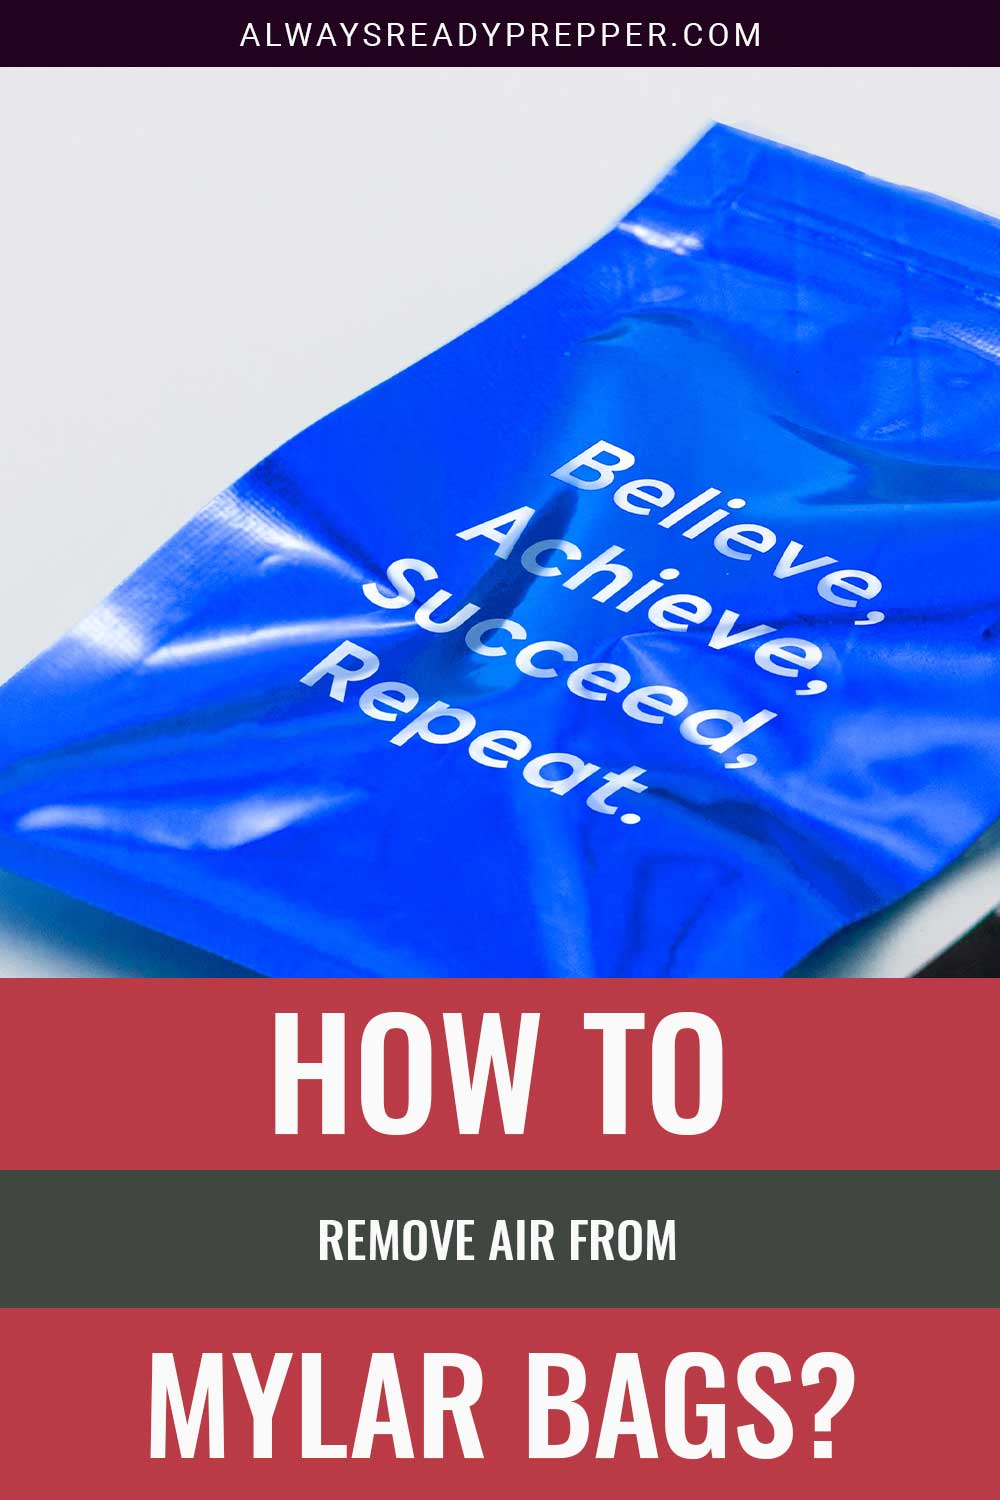 A Mylar bag on a white surface - how can you remove air from it?